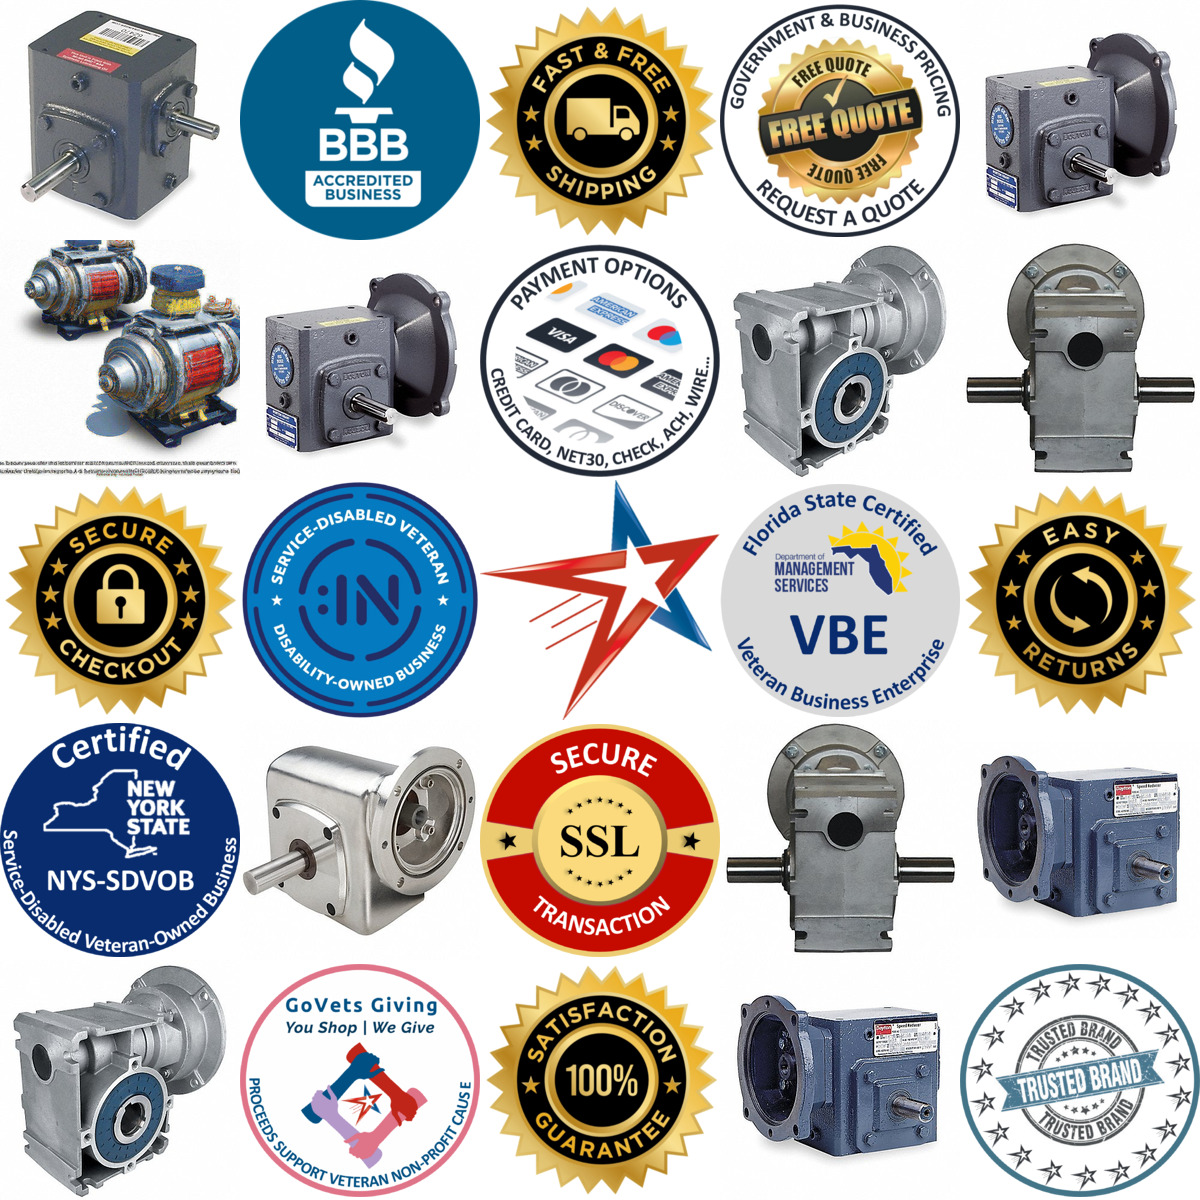 A selection of Speed Reducers products on GoVets